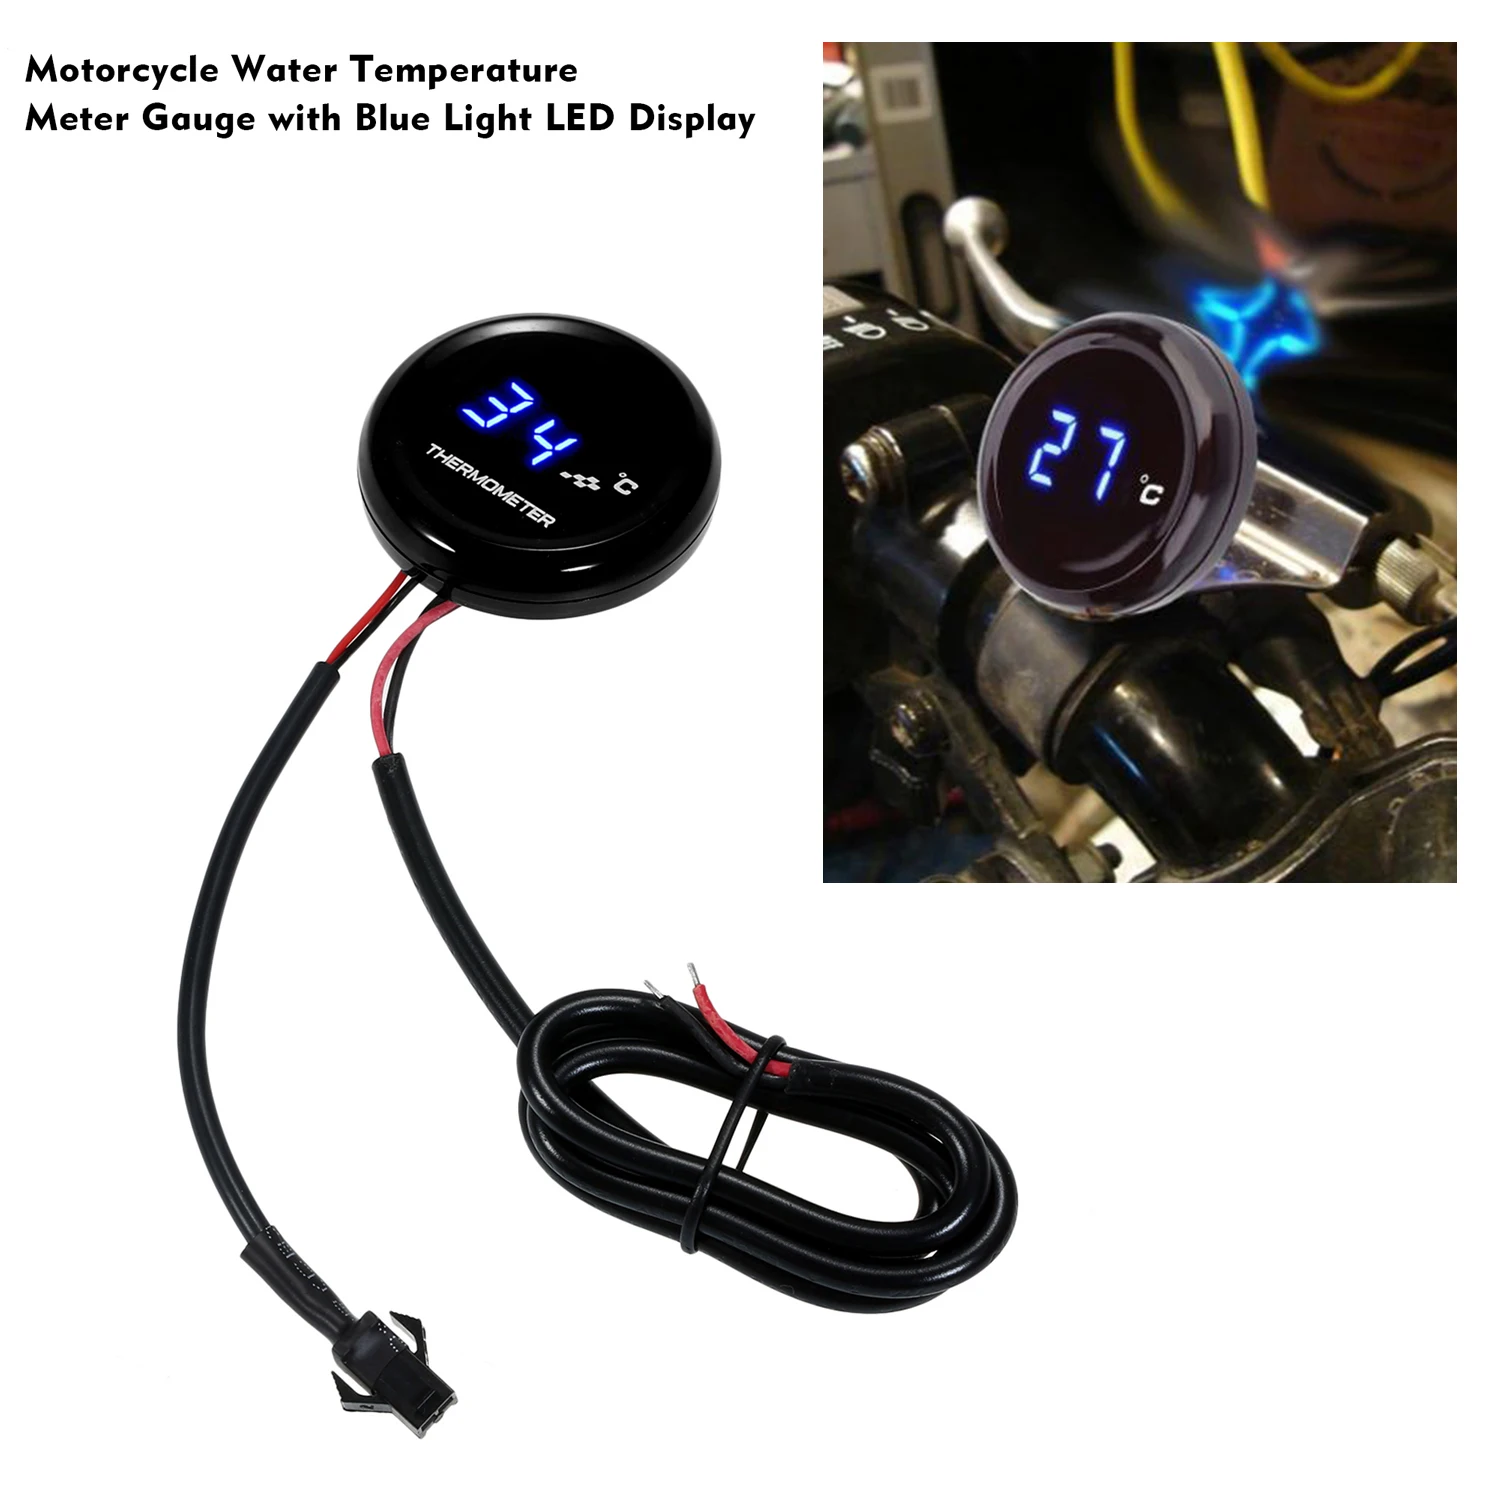 12v motorcycle digital thermometer ultra-thin round